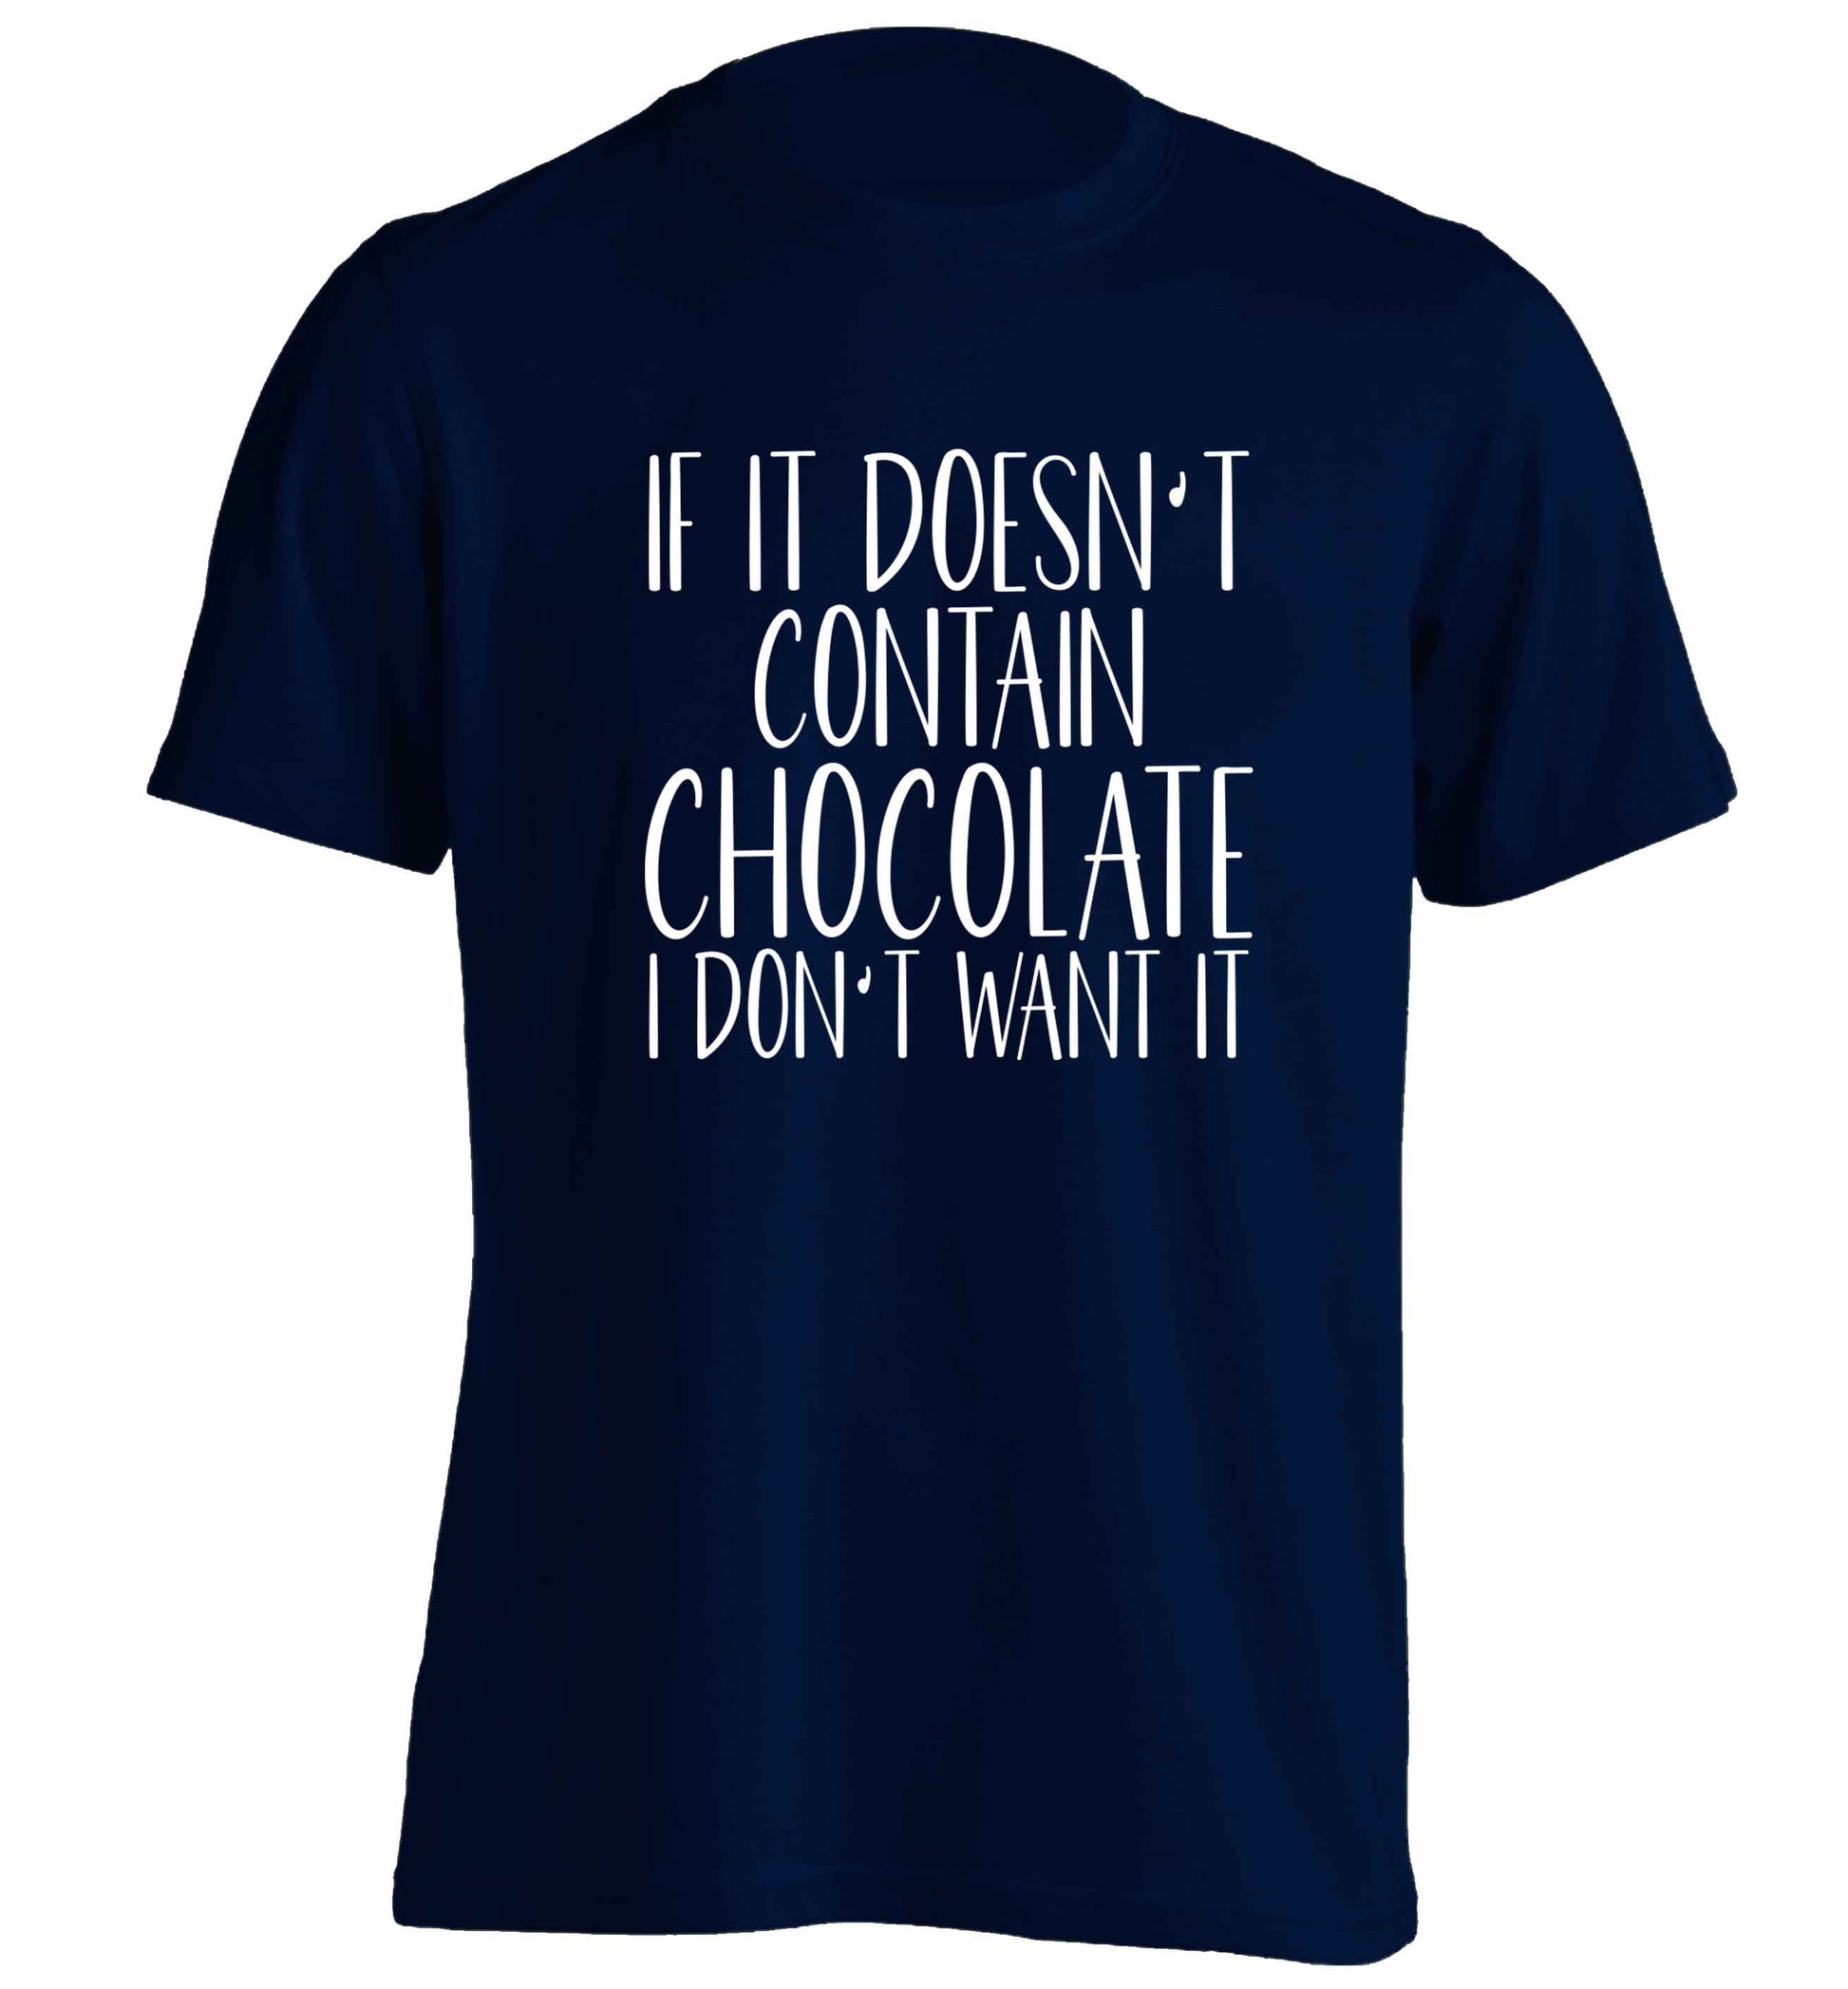 If it doesn't contain chocolate I don't want it adults unisex navy Tshirt 2XL